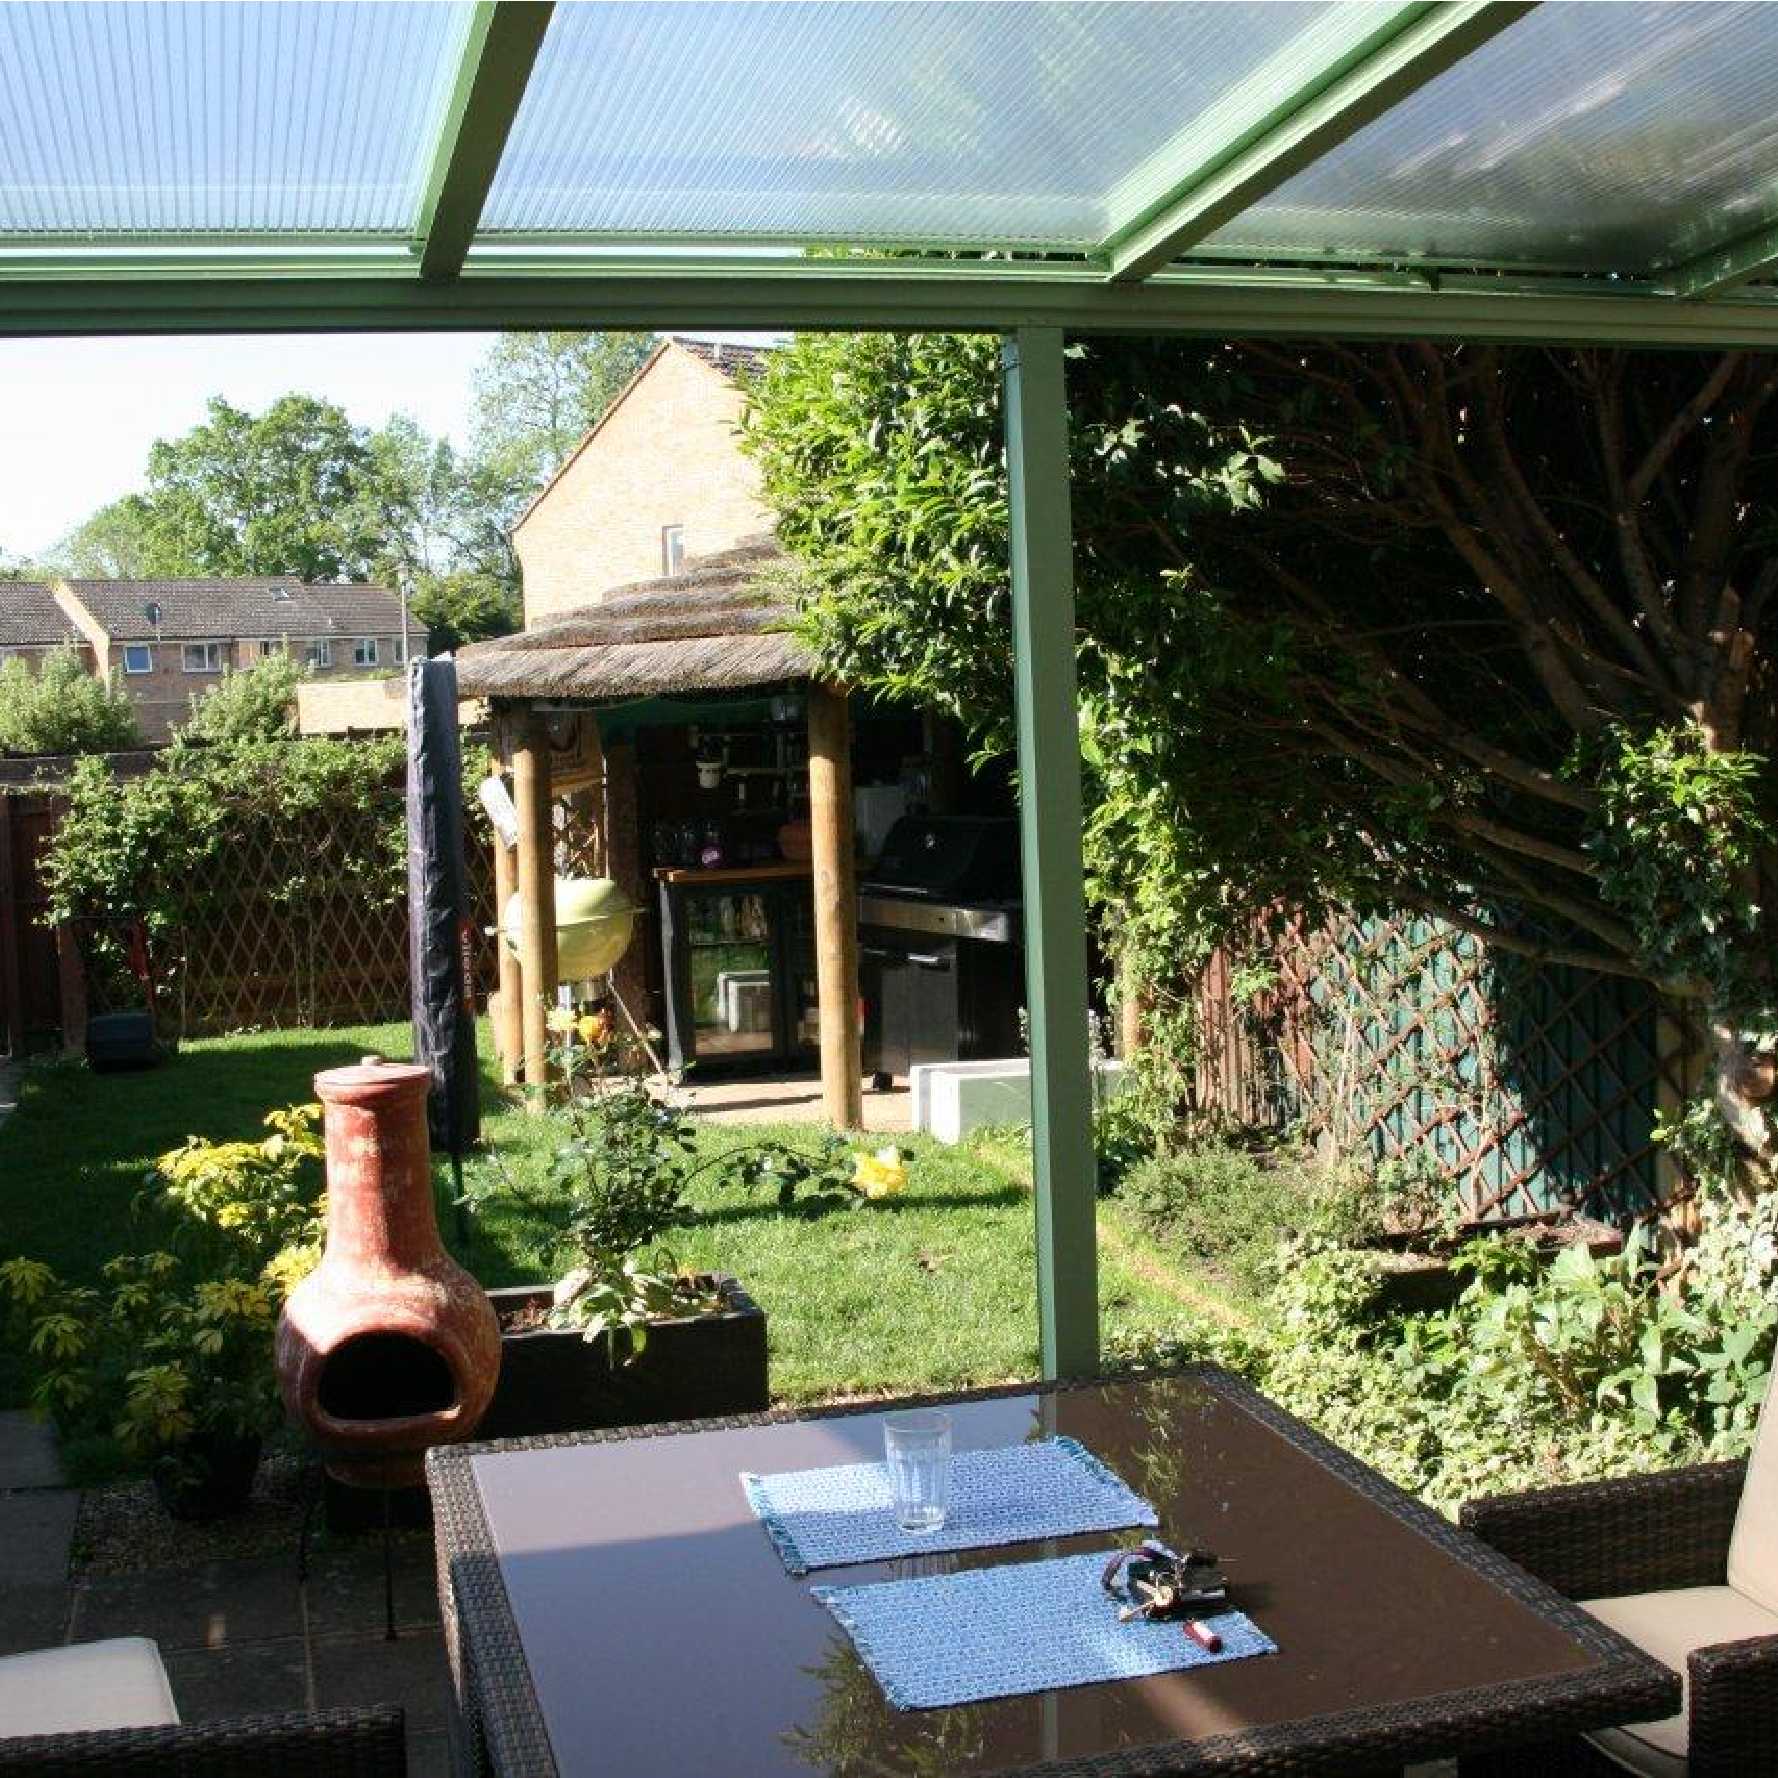 Affordable Omega Smart Lean-To Canopy, White with 16mm Polycarbonate Glazing - 8.4m (W) x 2.5m (P), (4) Supporting Posts